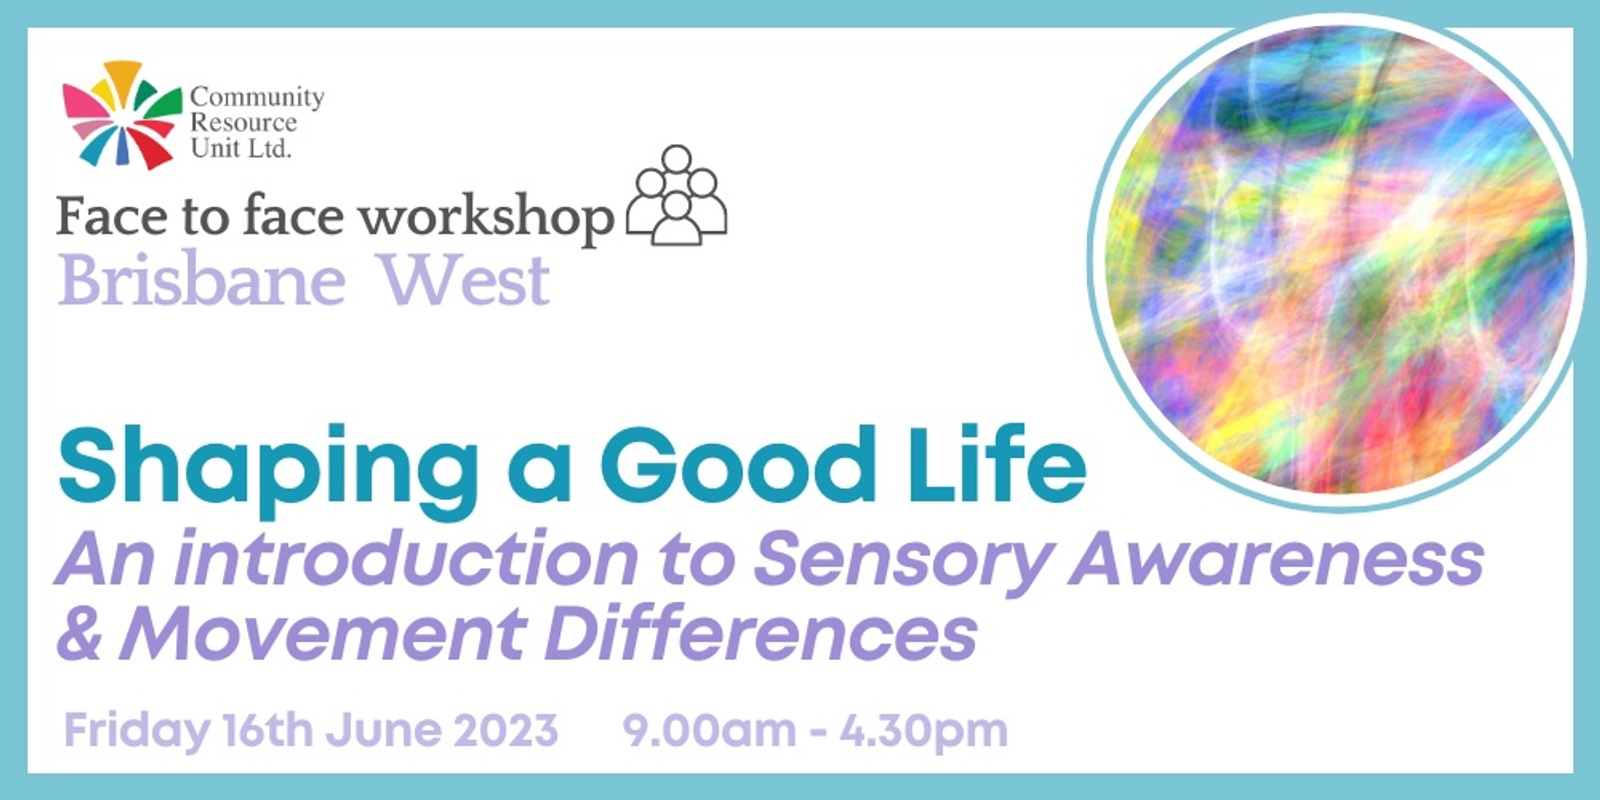 Brisbane West: Shaping a Good Life - An Introduction to Sensory Awareness & Movement Differences